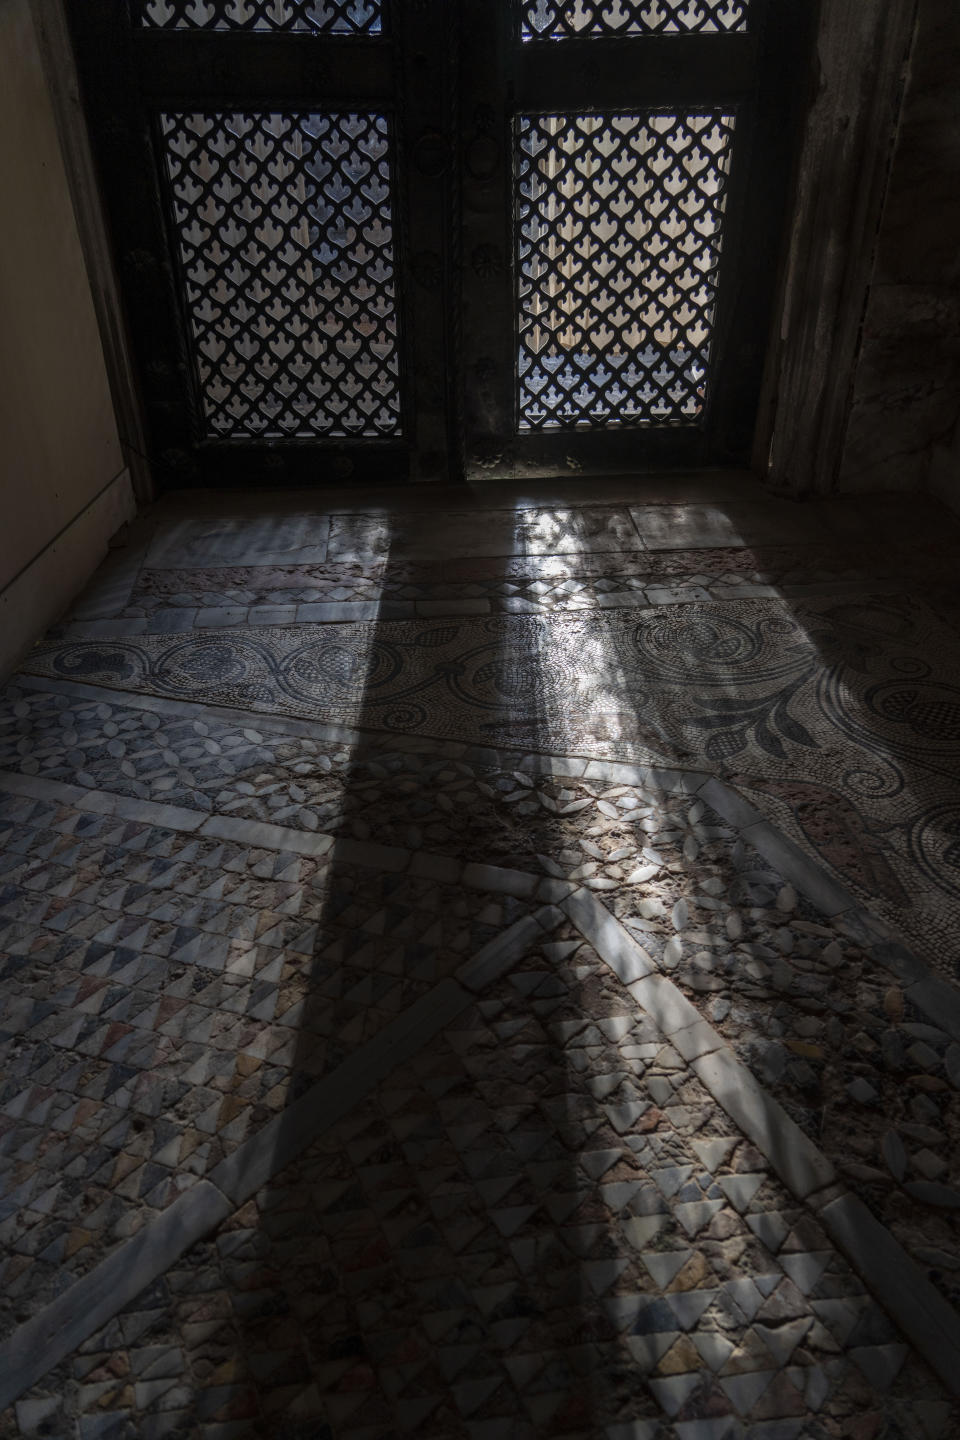 The sunlight filtering through one of the doors of St. Mark's Basilica casts patterns on the floor mosaics bleached by seawaters in Venice, northern Italy, Wednesday, Dec. 7, 2022. Glass barriers that prevent seawater from flooding the 900-year-old iconic Venice's Basilica have been recently installed around it. St. Mark's Square is the lowest-laying city area and frequently ends up underwater during extreme weather. (AP Photo/Domenico Stinellis)